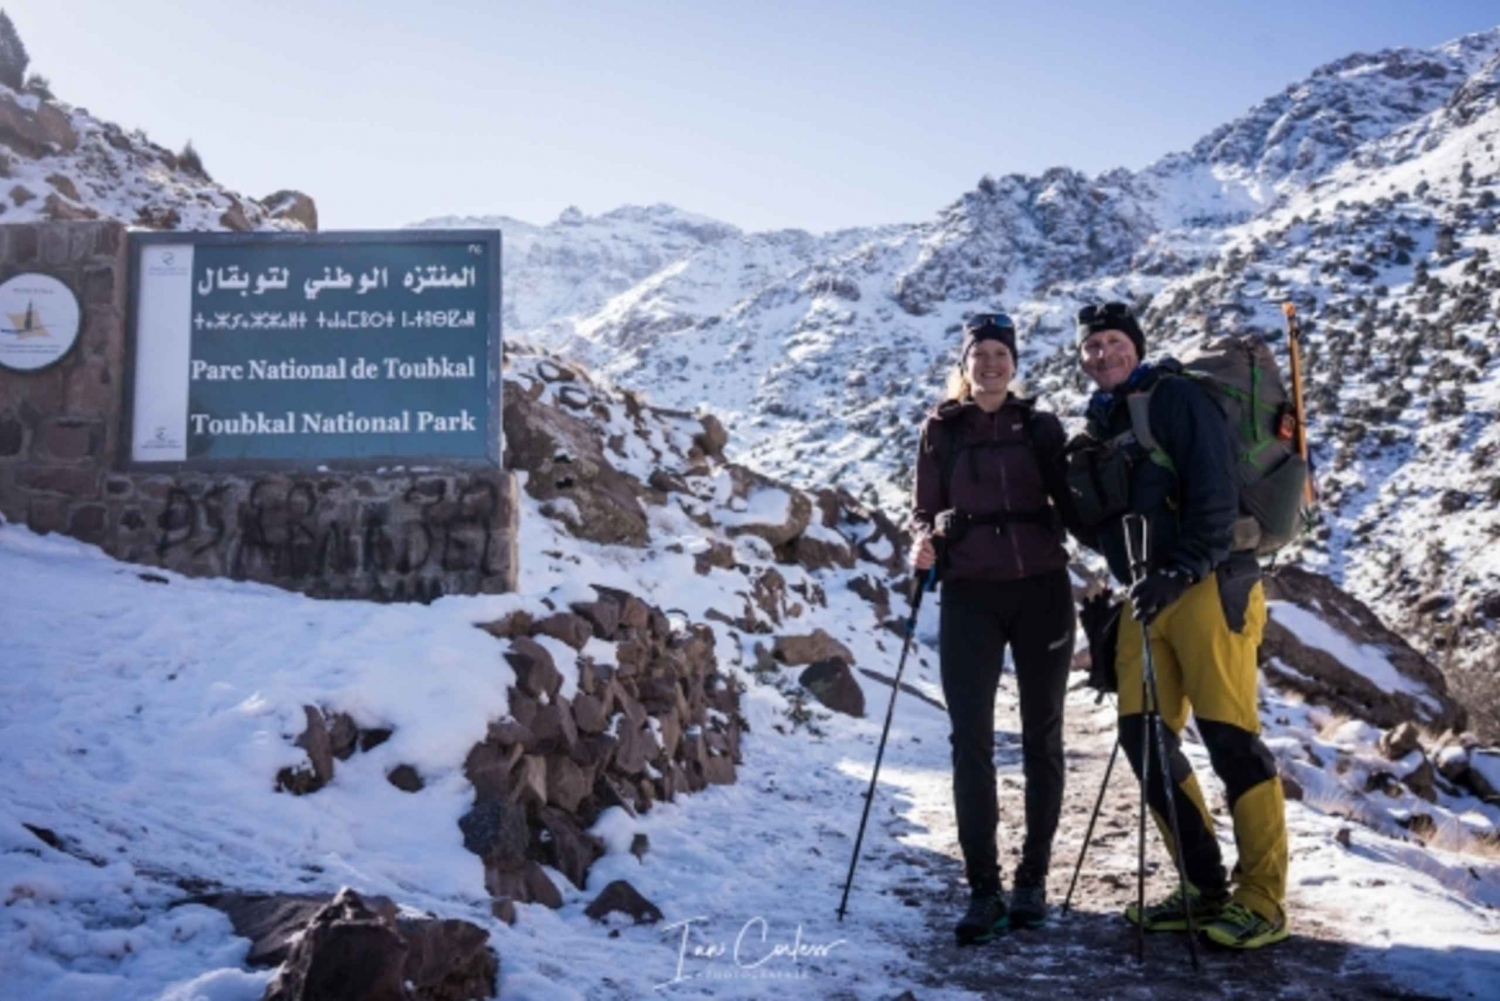 Hike the highest peak in North Africa: Mount Toubkal (4167m)